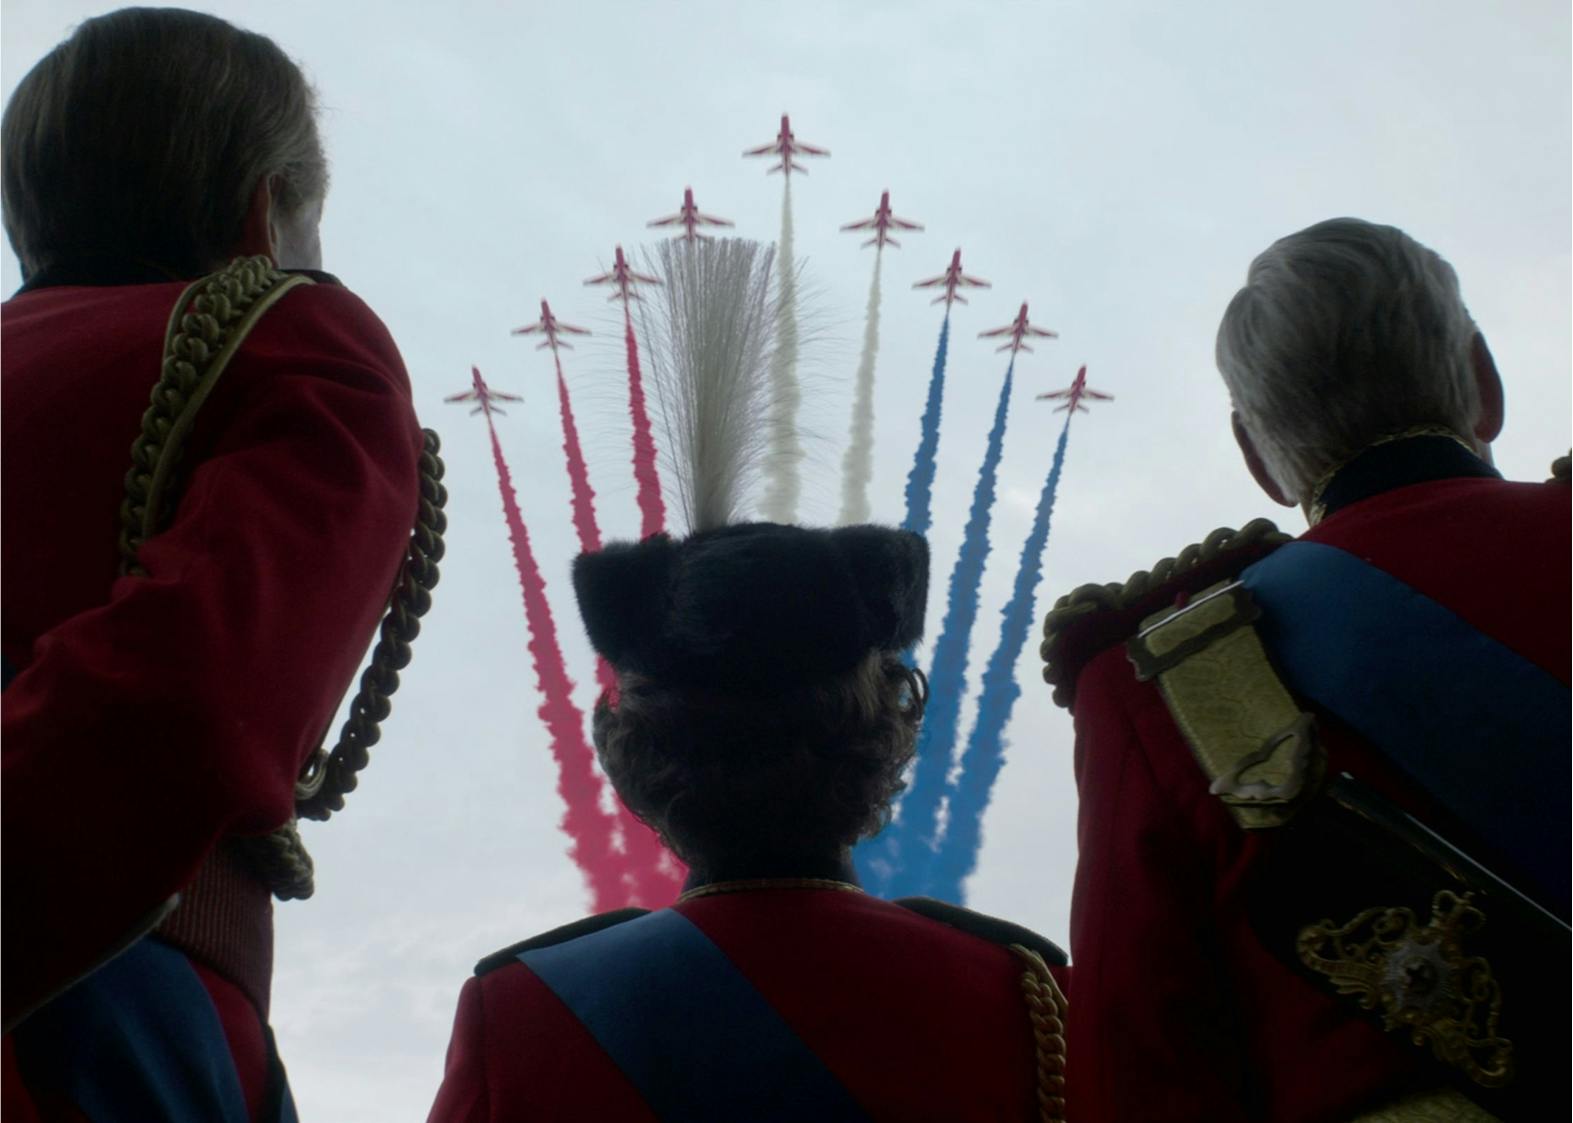 The silhouette of the Queen and two other men wear military garb and watch as planes shoot into the sky with red, white, and blue streams behind them.